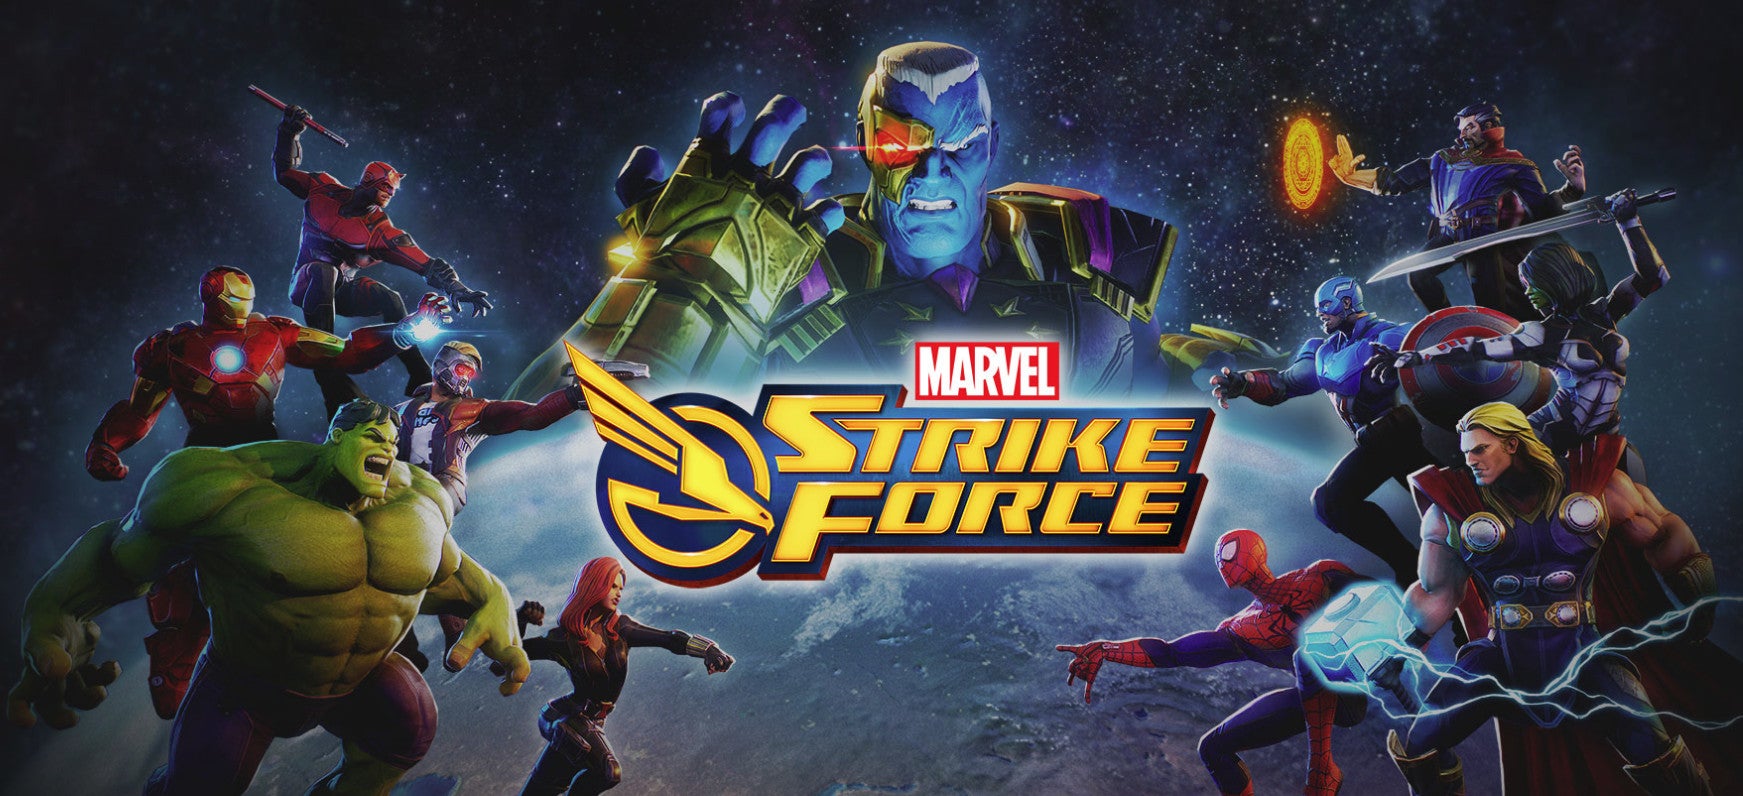 Marvel Strike Force is a new mobile RPG launching in 2018, pre-registrations now open